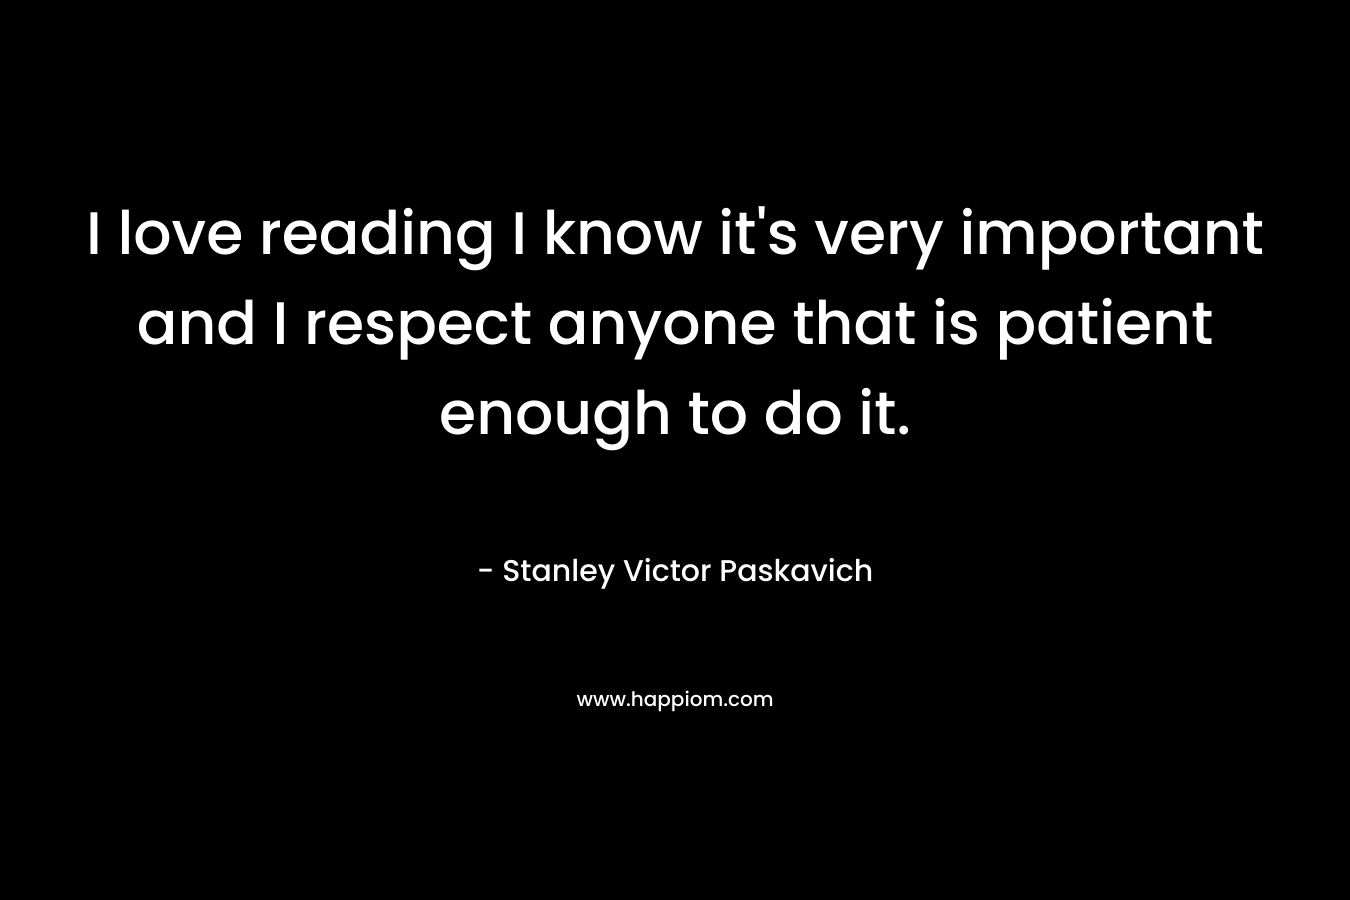 I love reading I know it's very important and I respect anyone that is patient enough to do it.